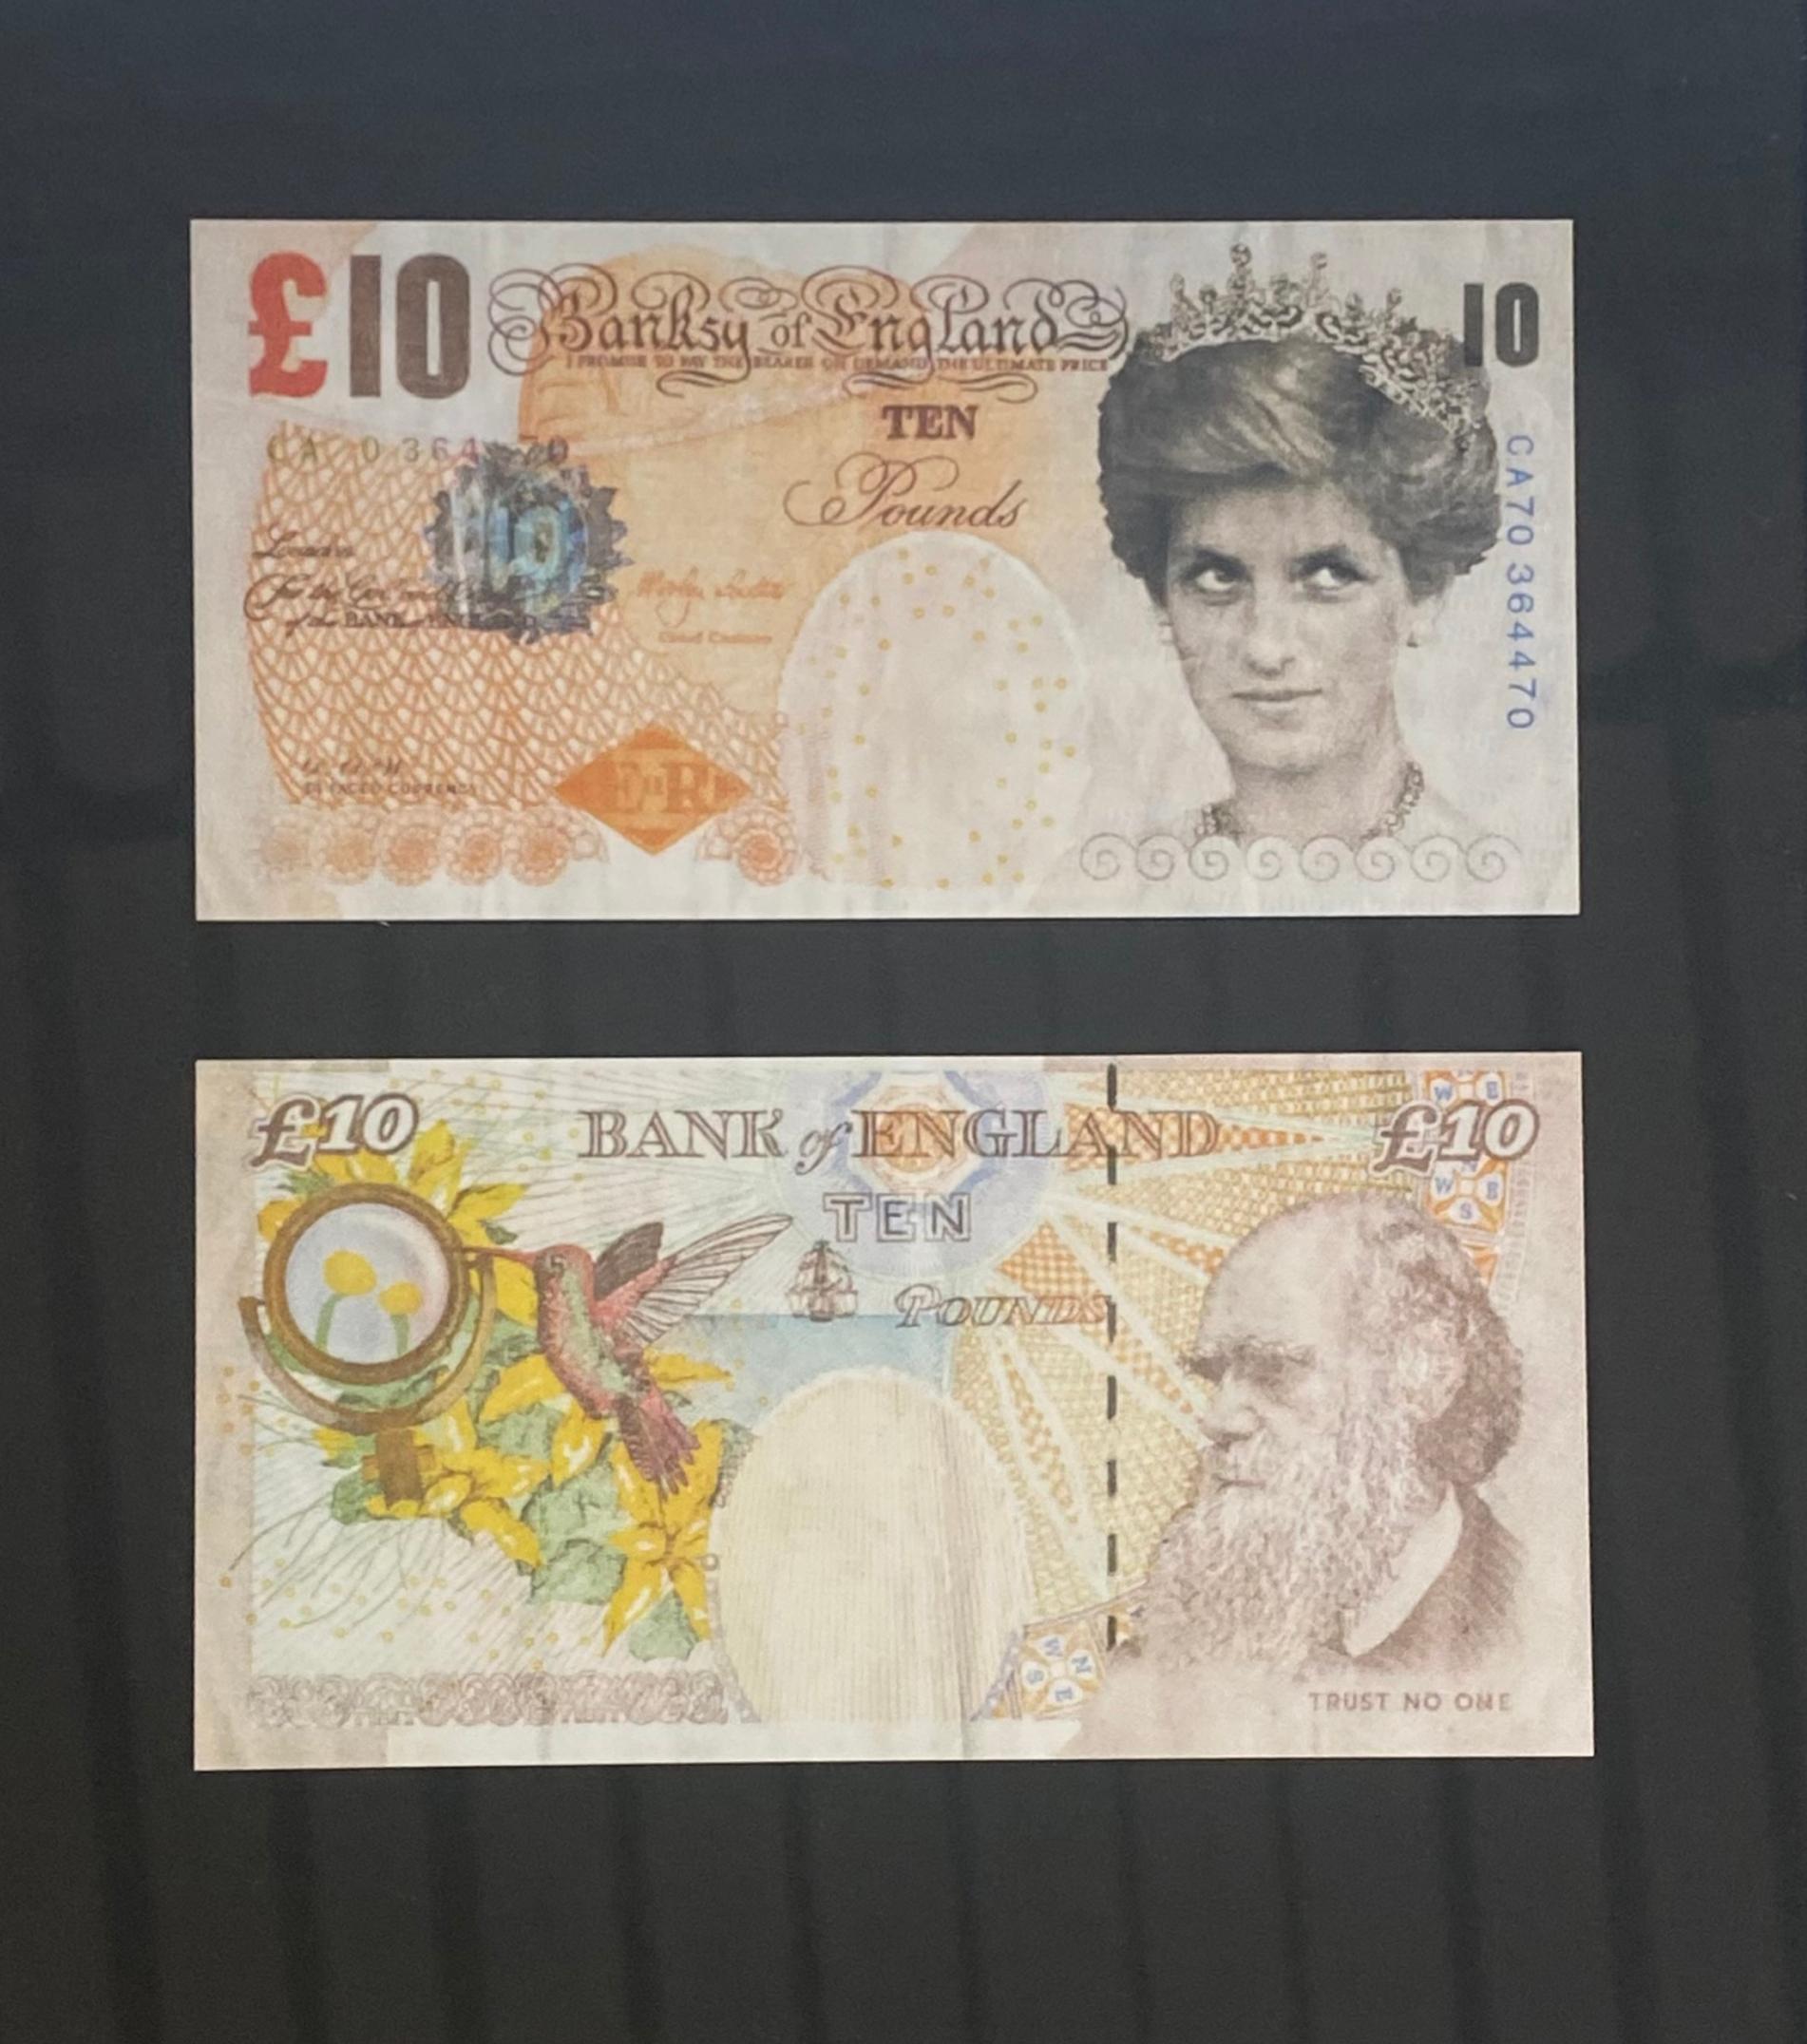 Paper Banksy, Banksy '1974', After Set of Two Lady Di-Faced Tenner